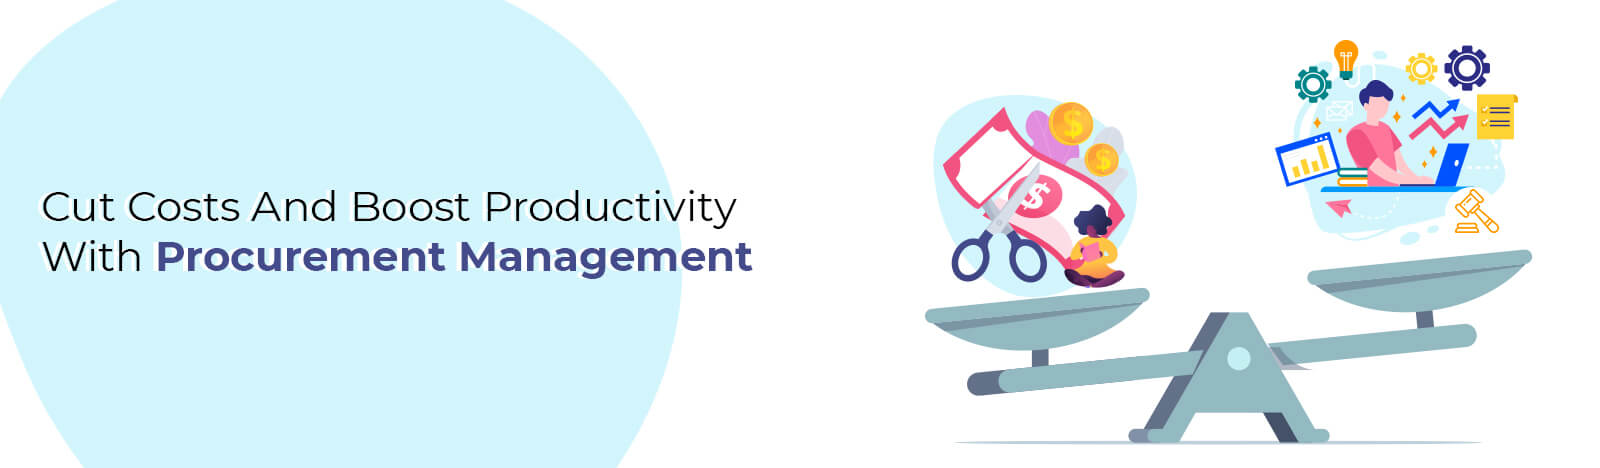 Cut Costs And Boost Productivity With Procurement Management